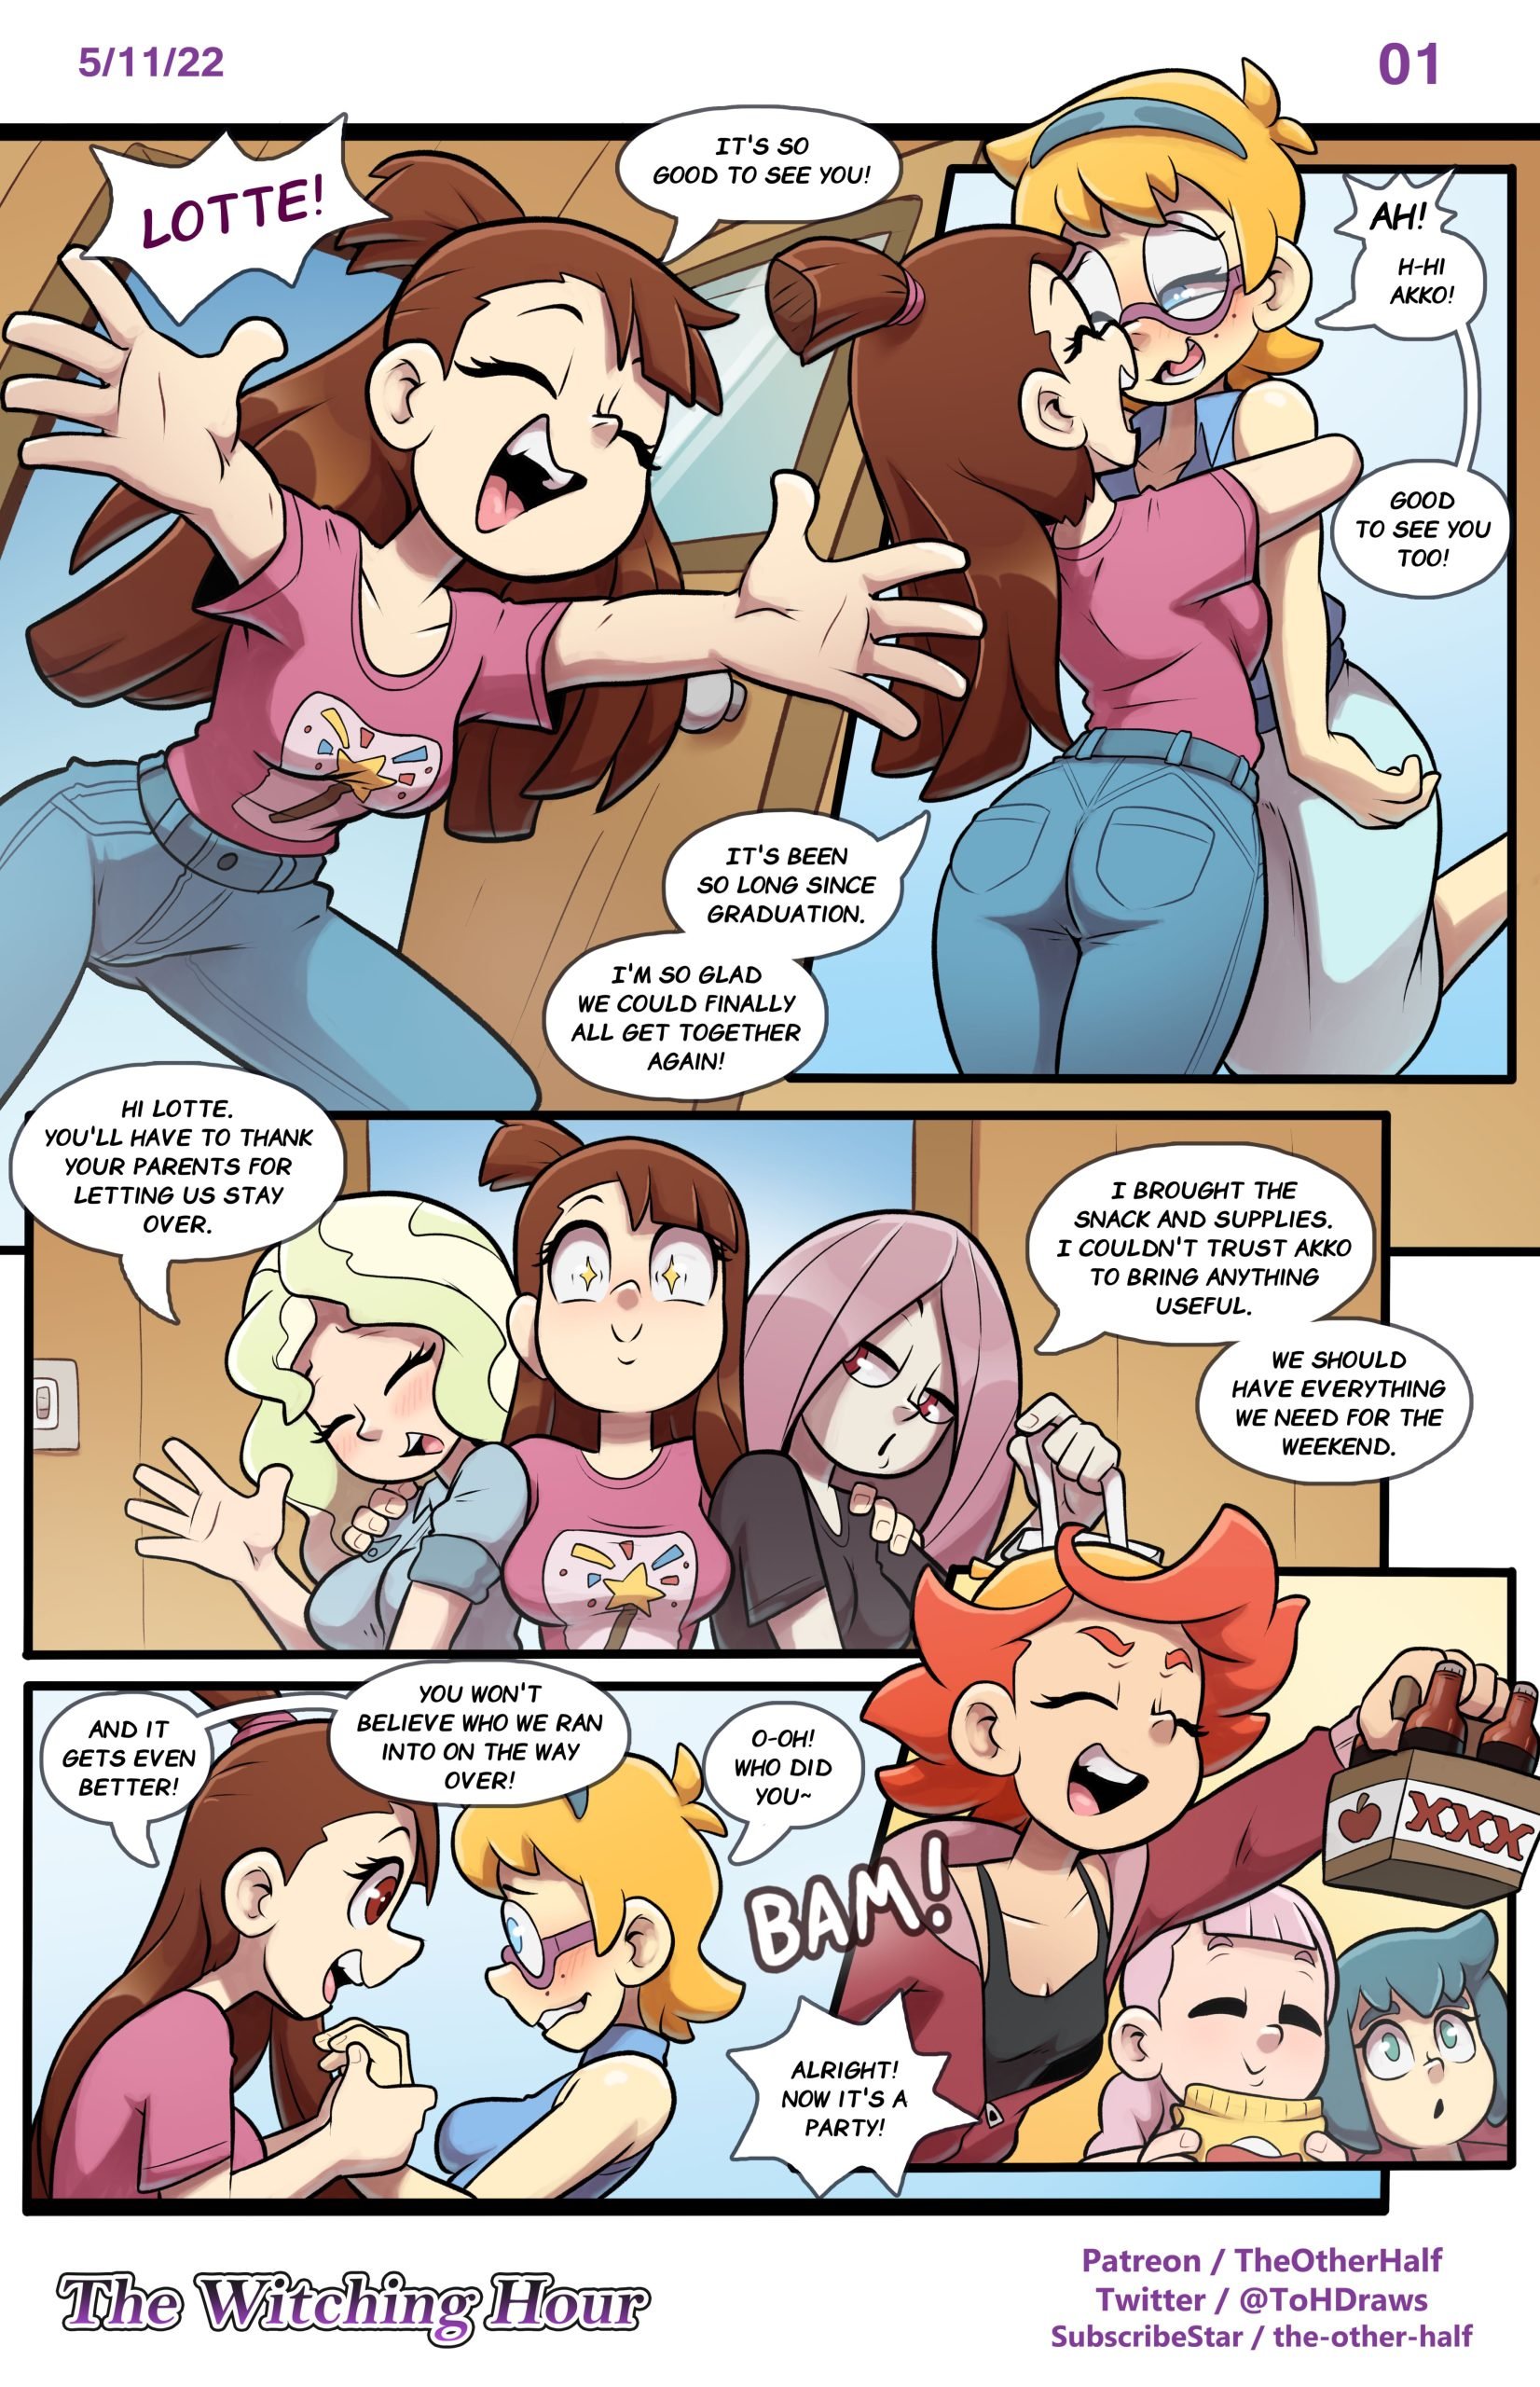 The Witching Hour (Little Witch Academia) TheOtherHalf Porn Comic image image